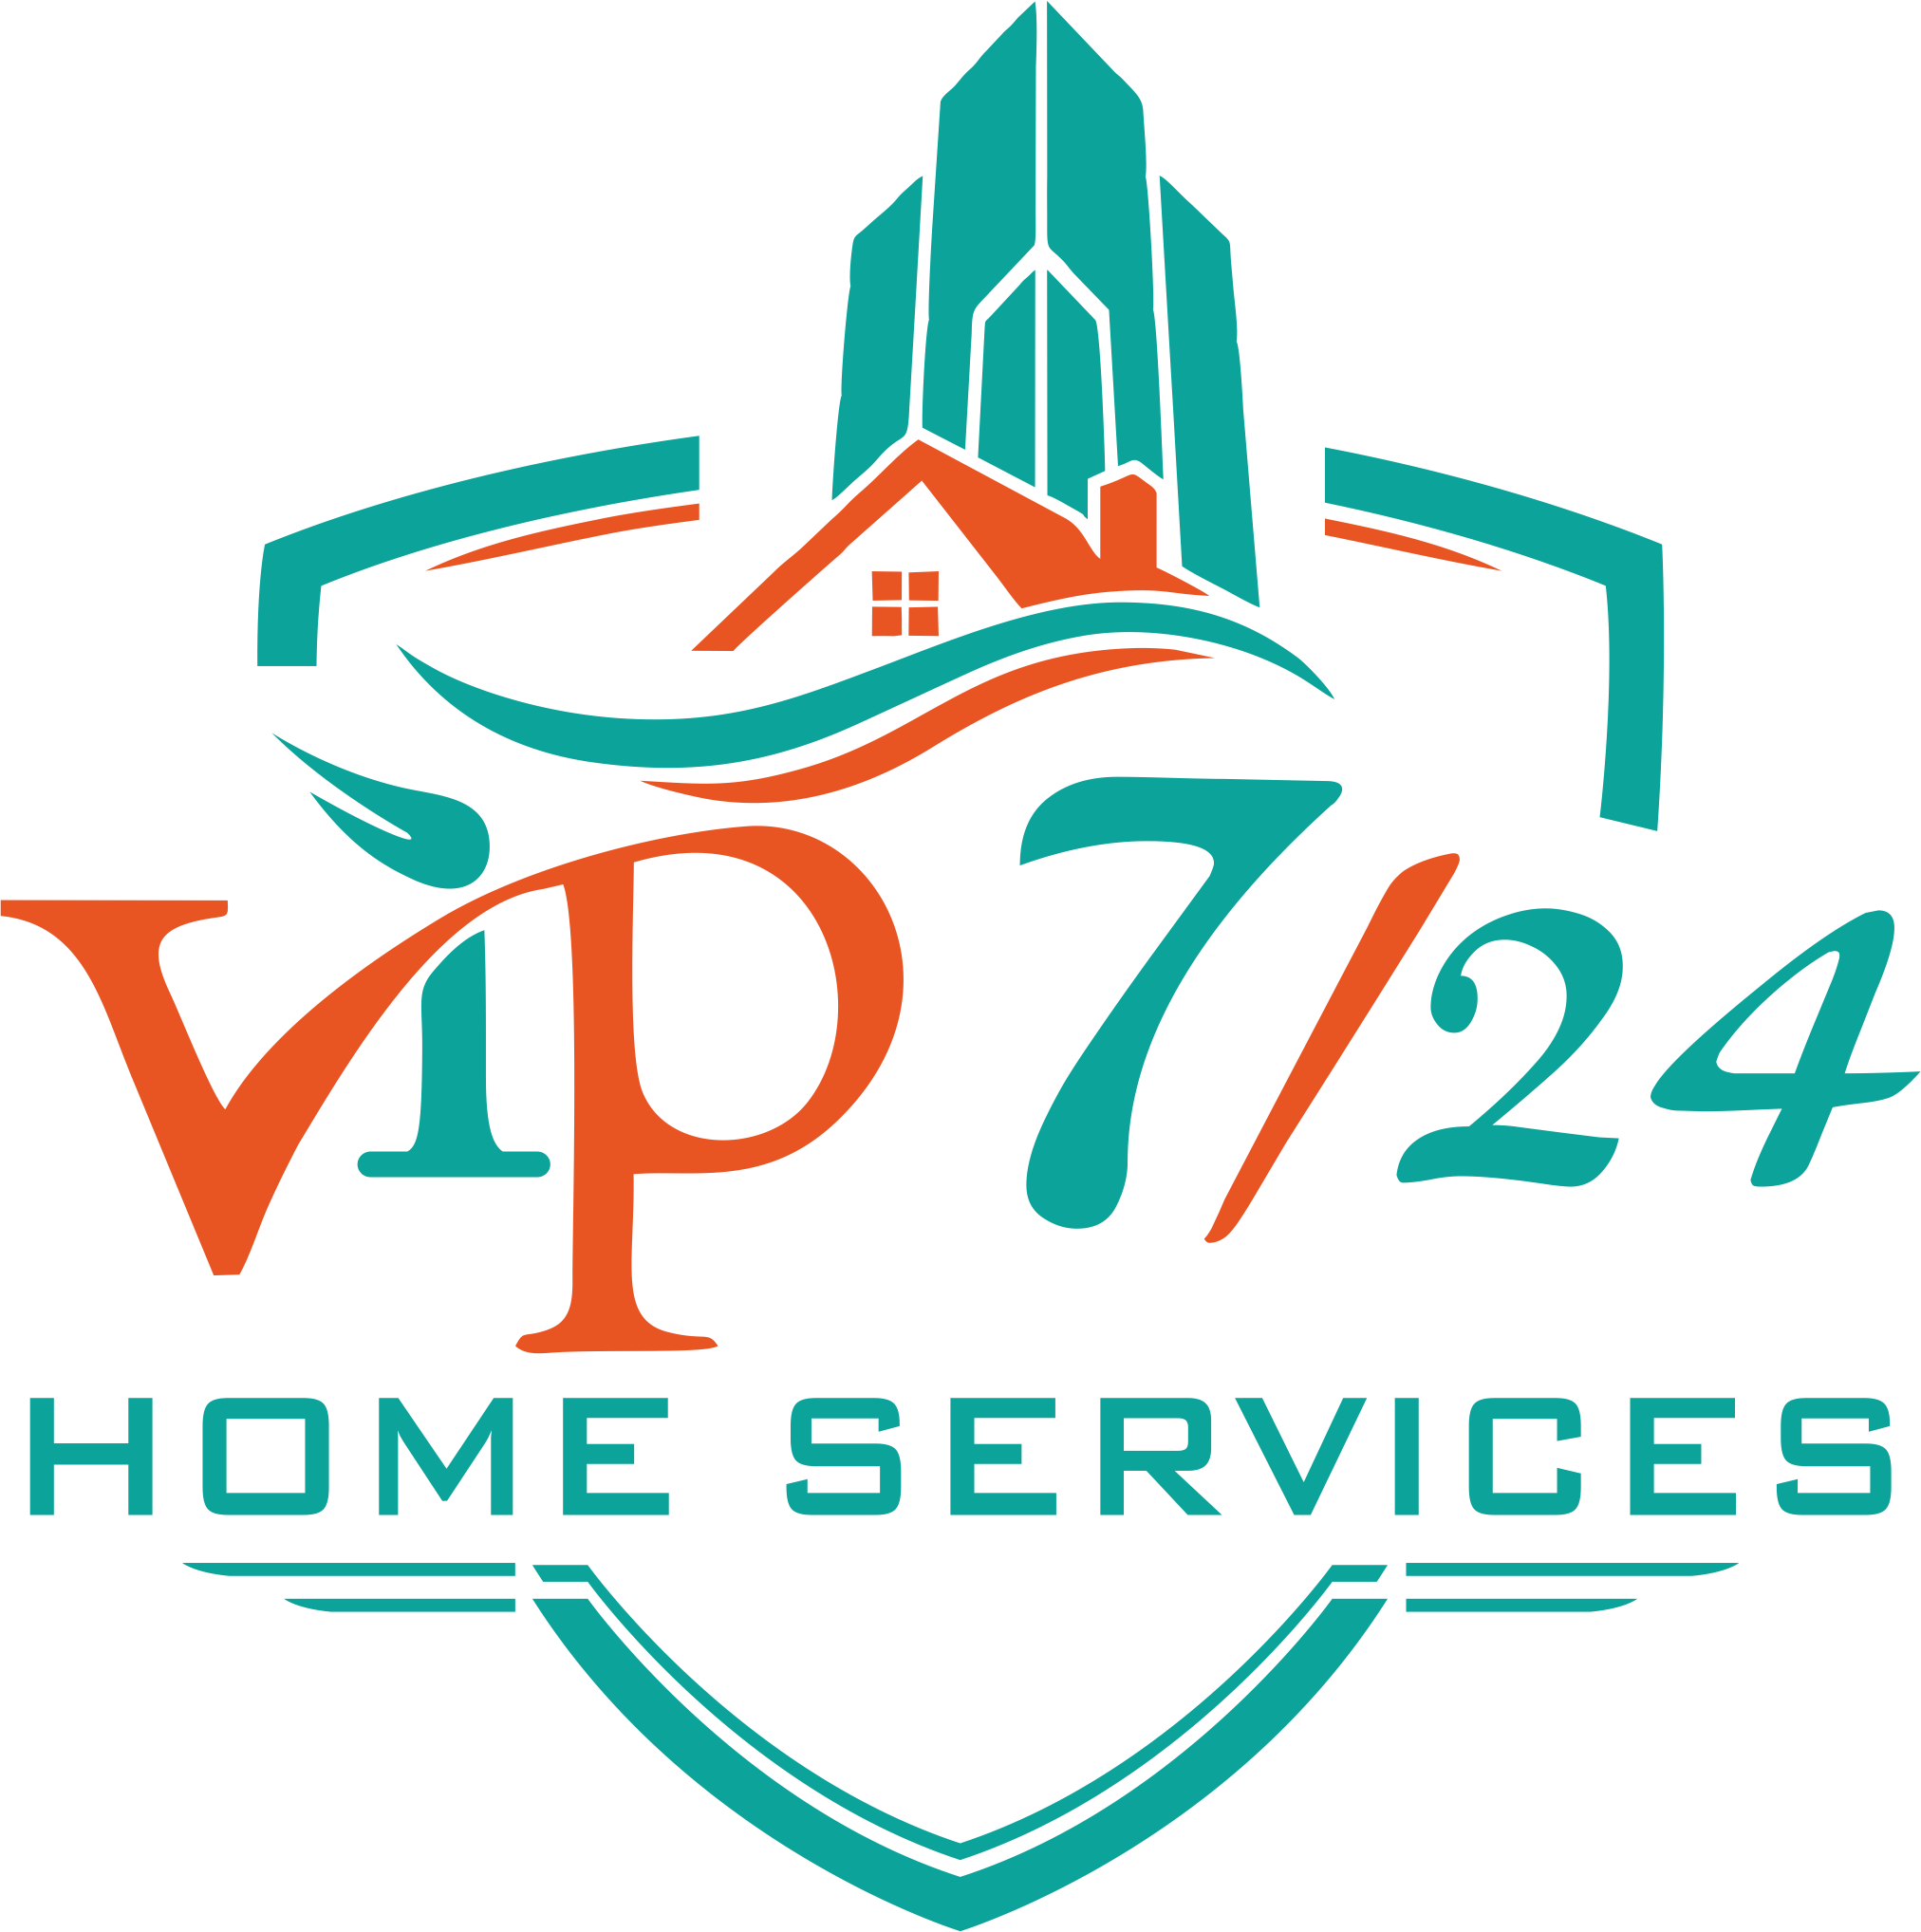 Vip 7/24 Home Services